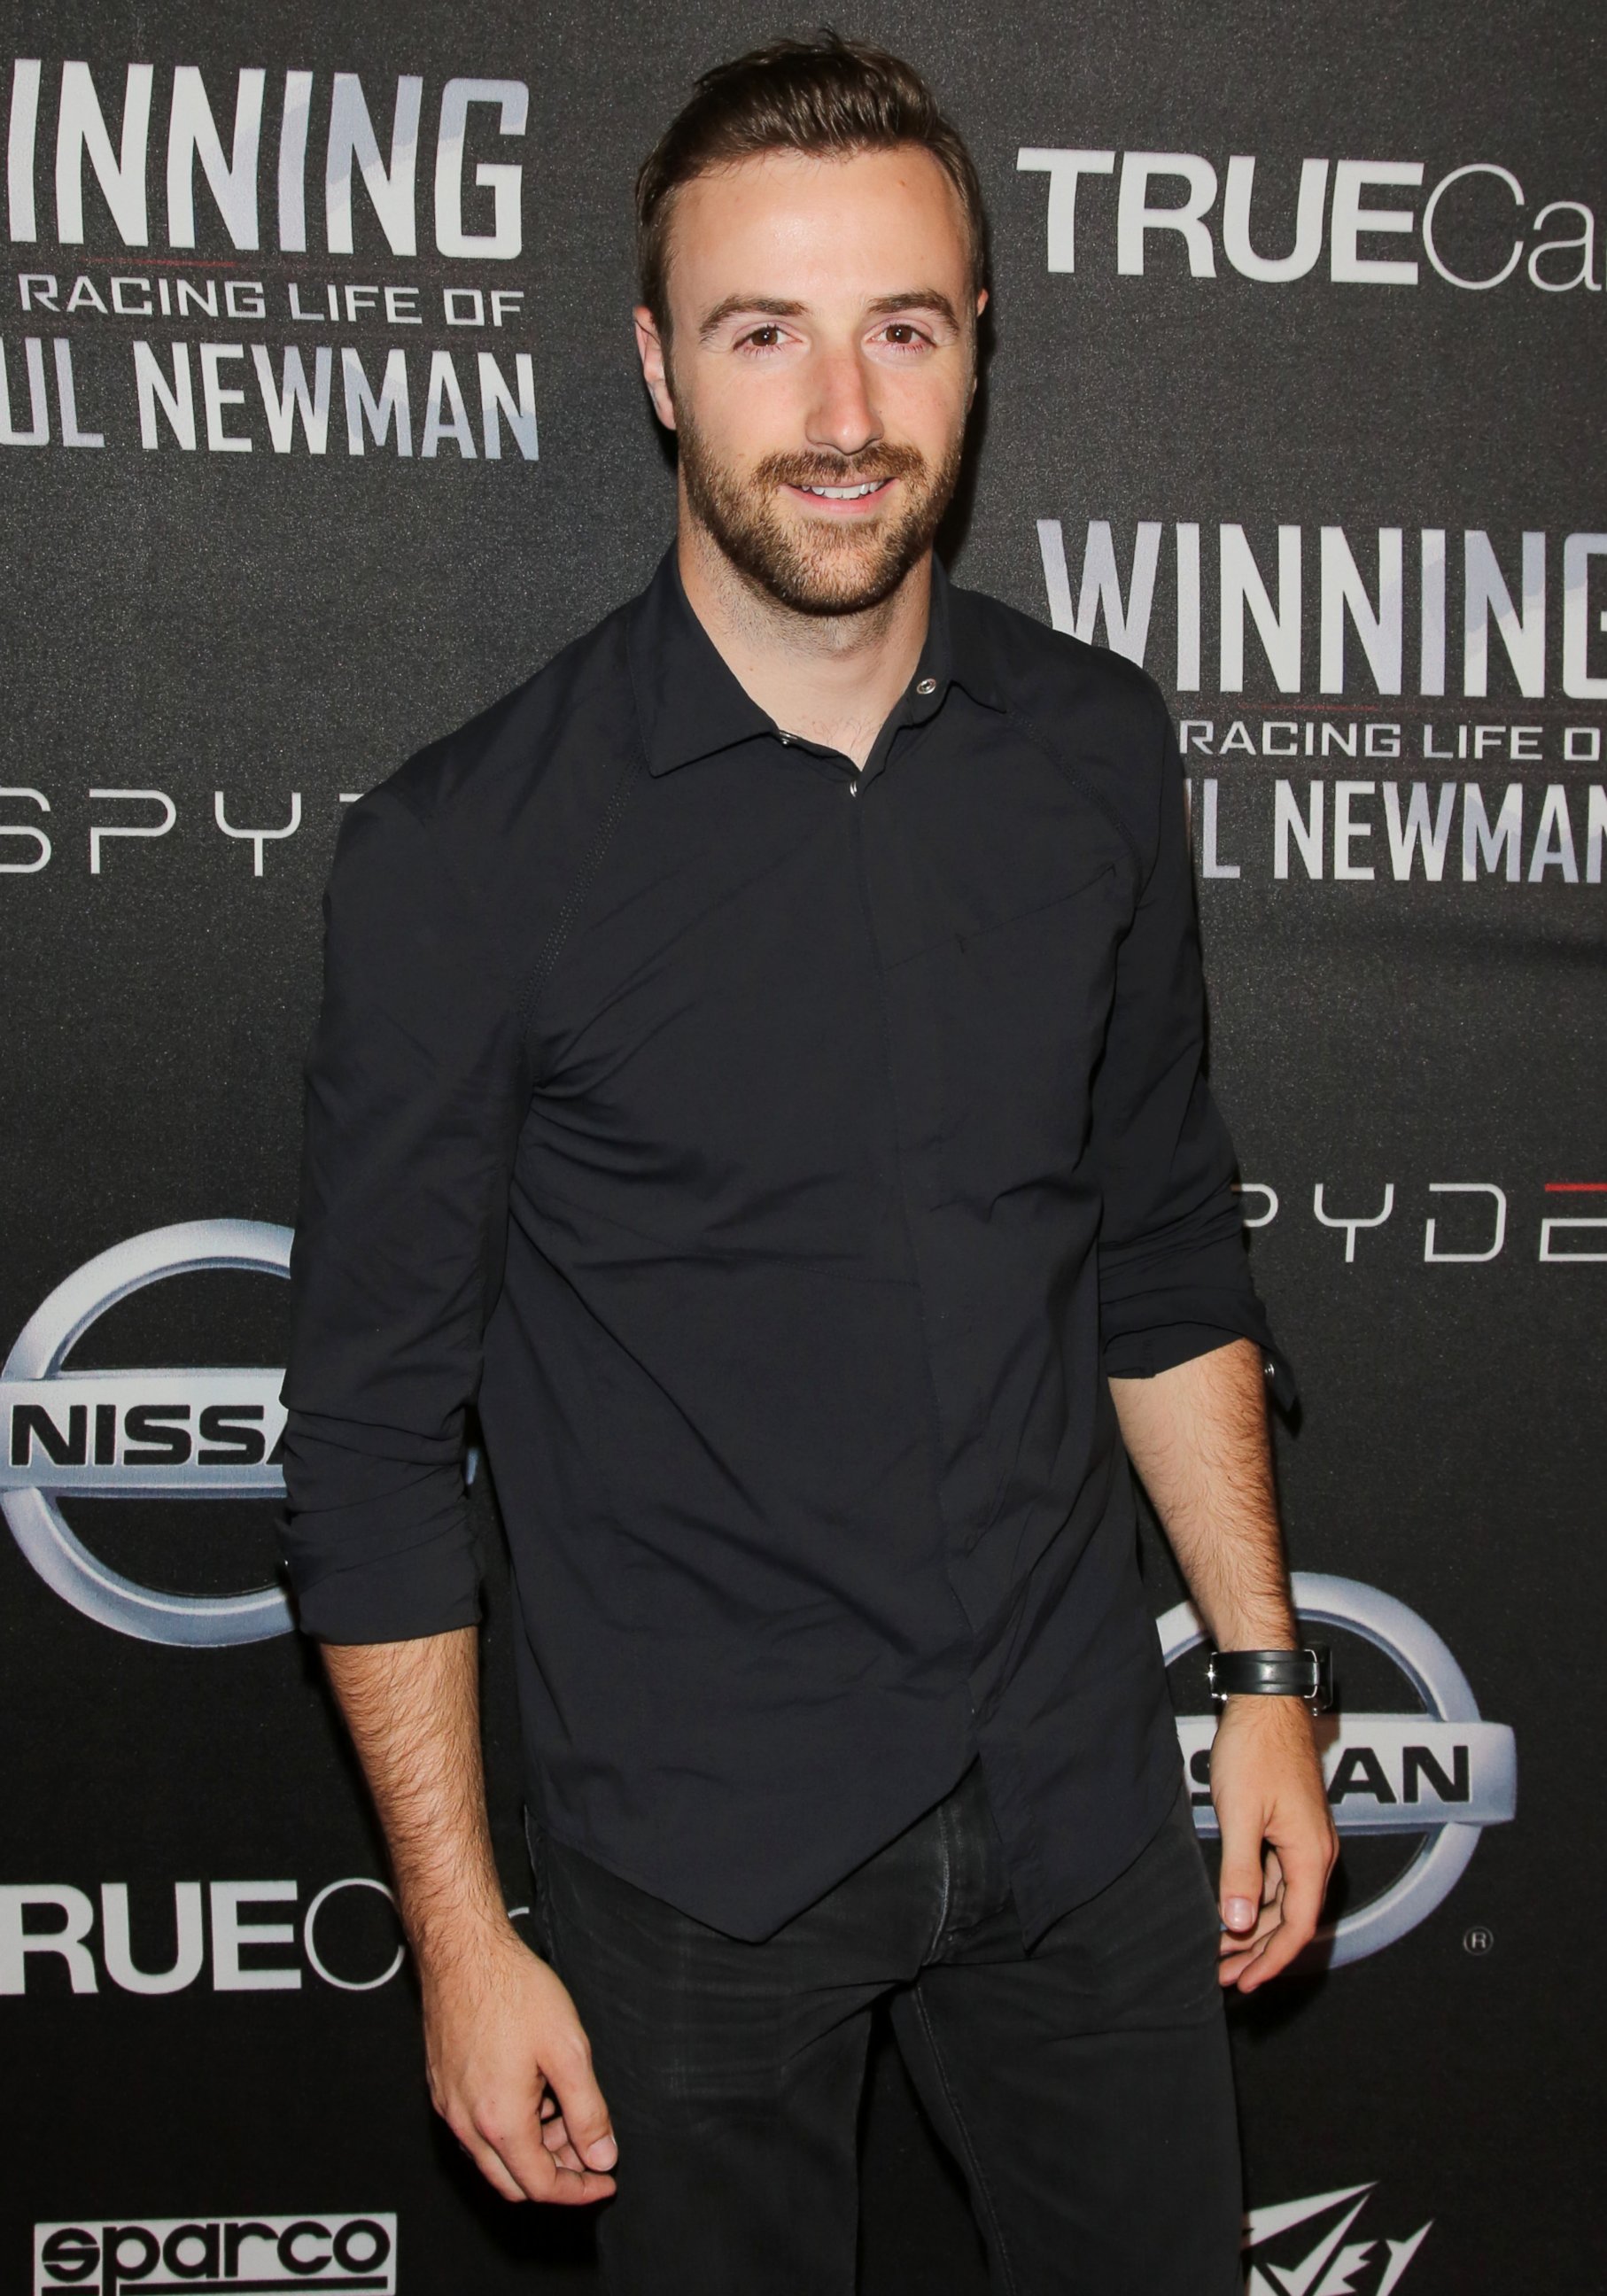 PHOTO: Race car driver James Hinchcliffe attends the screening of "WINNING: The Racing Life Of Paul Newman" at the El Capitan Theatre, April 16, 2015, in Hollywood, California.